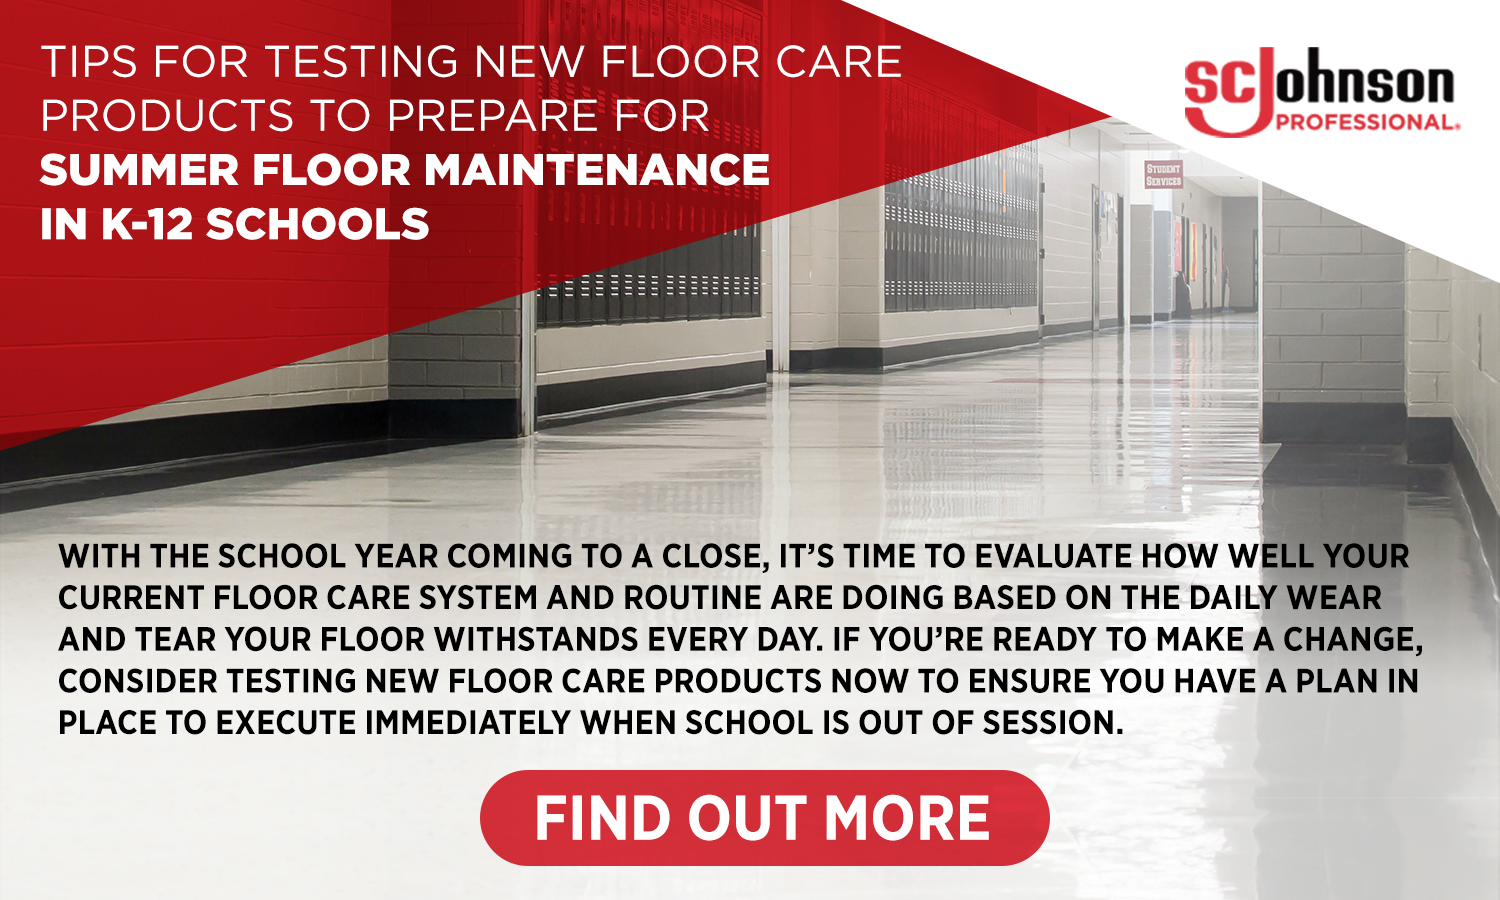 SC Johnson Testing New Floor Care Products in K-12 Schools